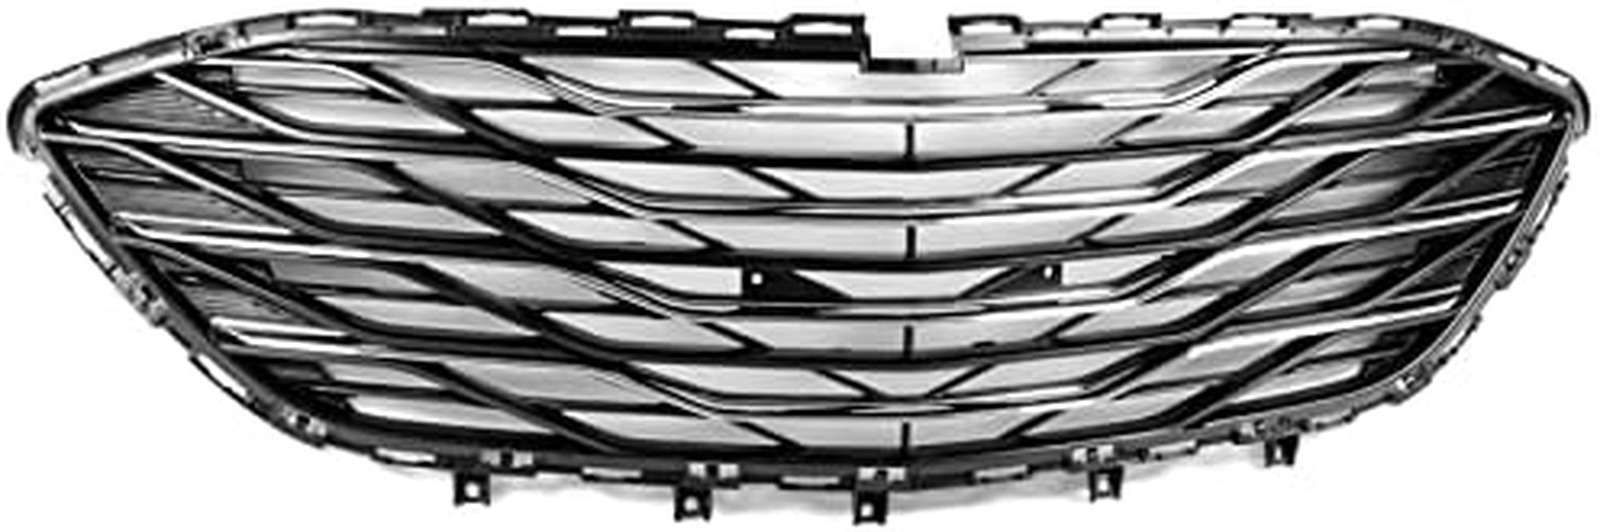 Mesh Front Bumper Lower Grille Grill Insert Black W/Chrome Trim Compatible with 